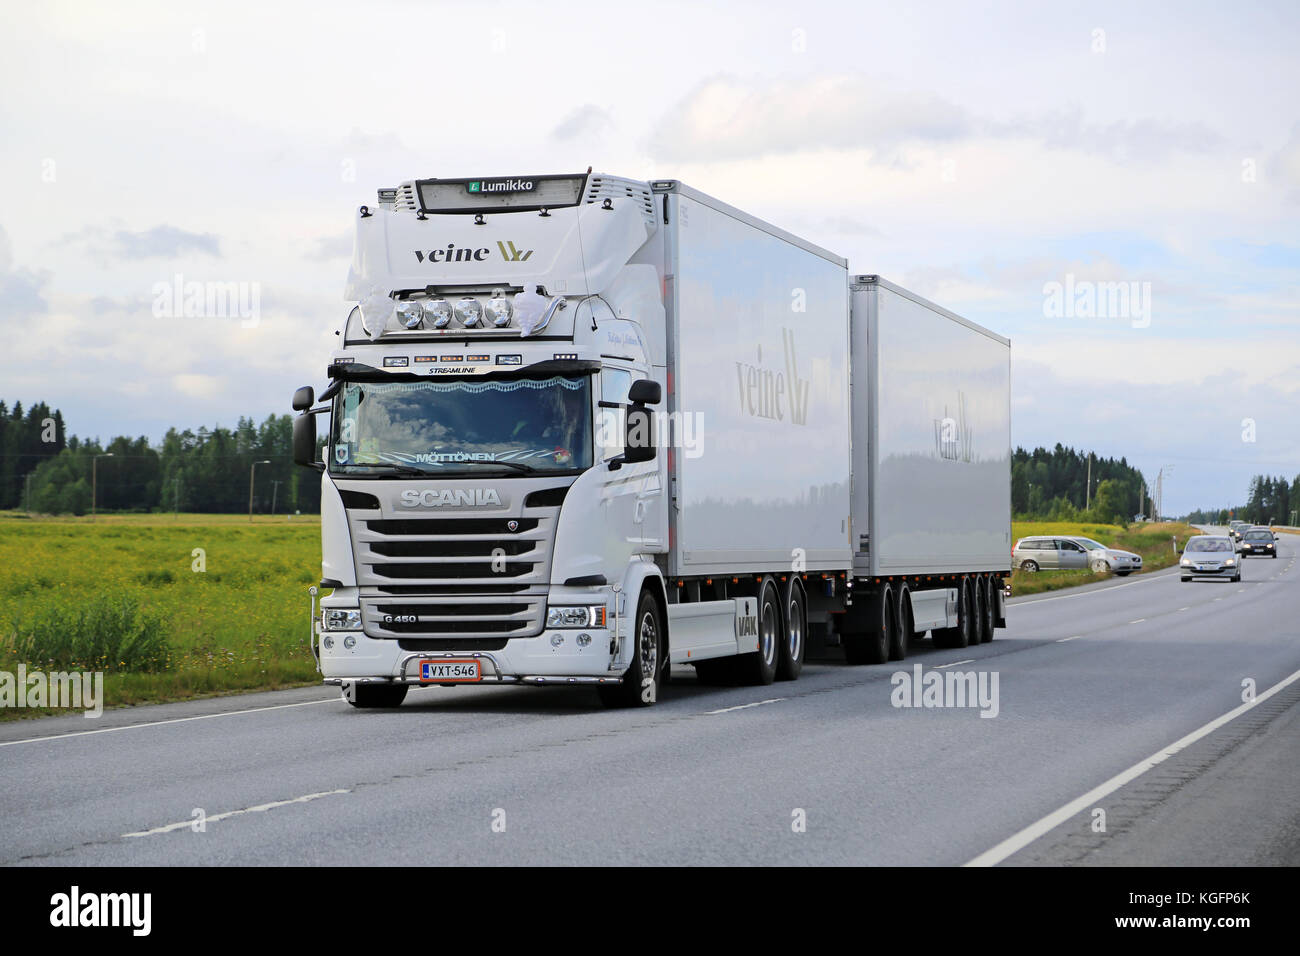 LUOPAJARVI, FINLAND - AUGUST 6, 2015: Scania G450 temperature controlled truck on the road. Early introduction of the Euro 6 range contributed to Scan Stock Photo